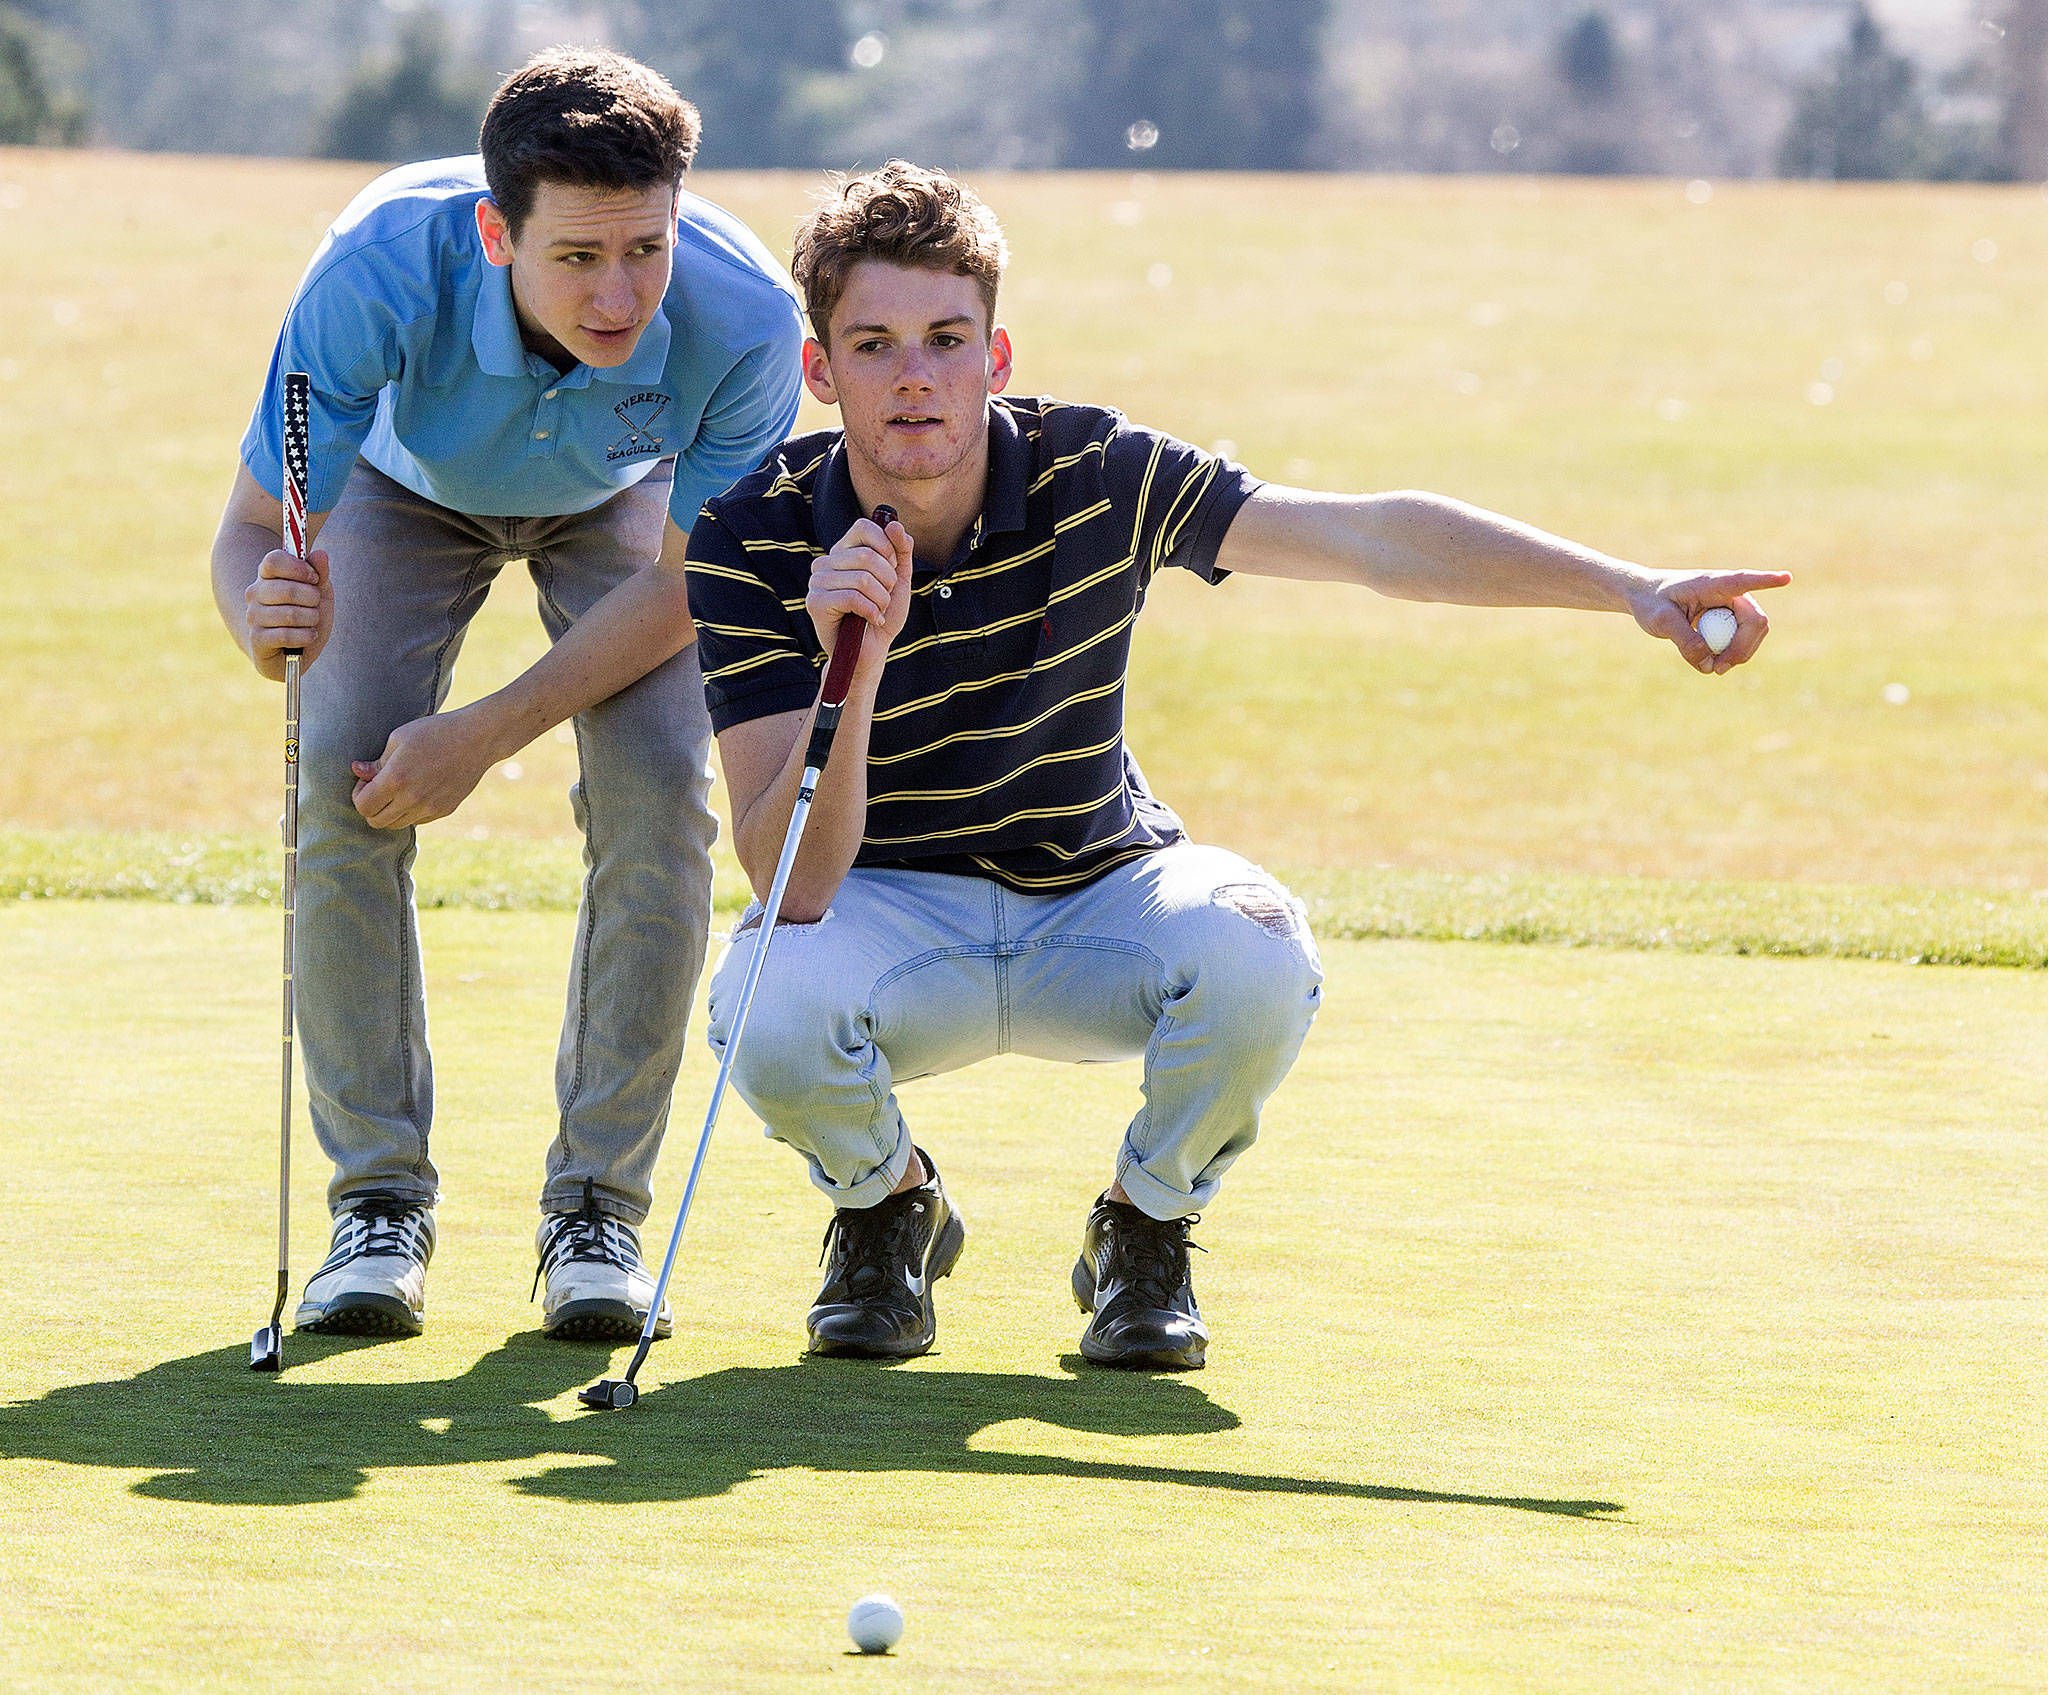 Everett’s Andrew Olson (left) and Ronny Kildall discuss the slope of the green as they line up their putts during a team practice Monday at Legion Memorial Golf Course in Everett. (Andy Bronson / The Herald)